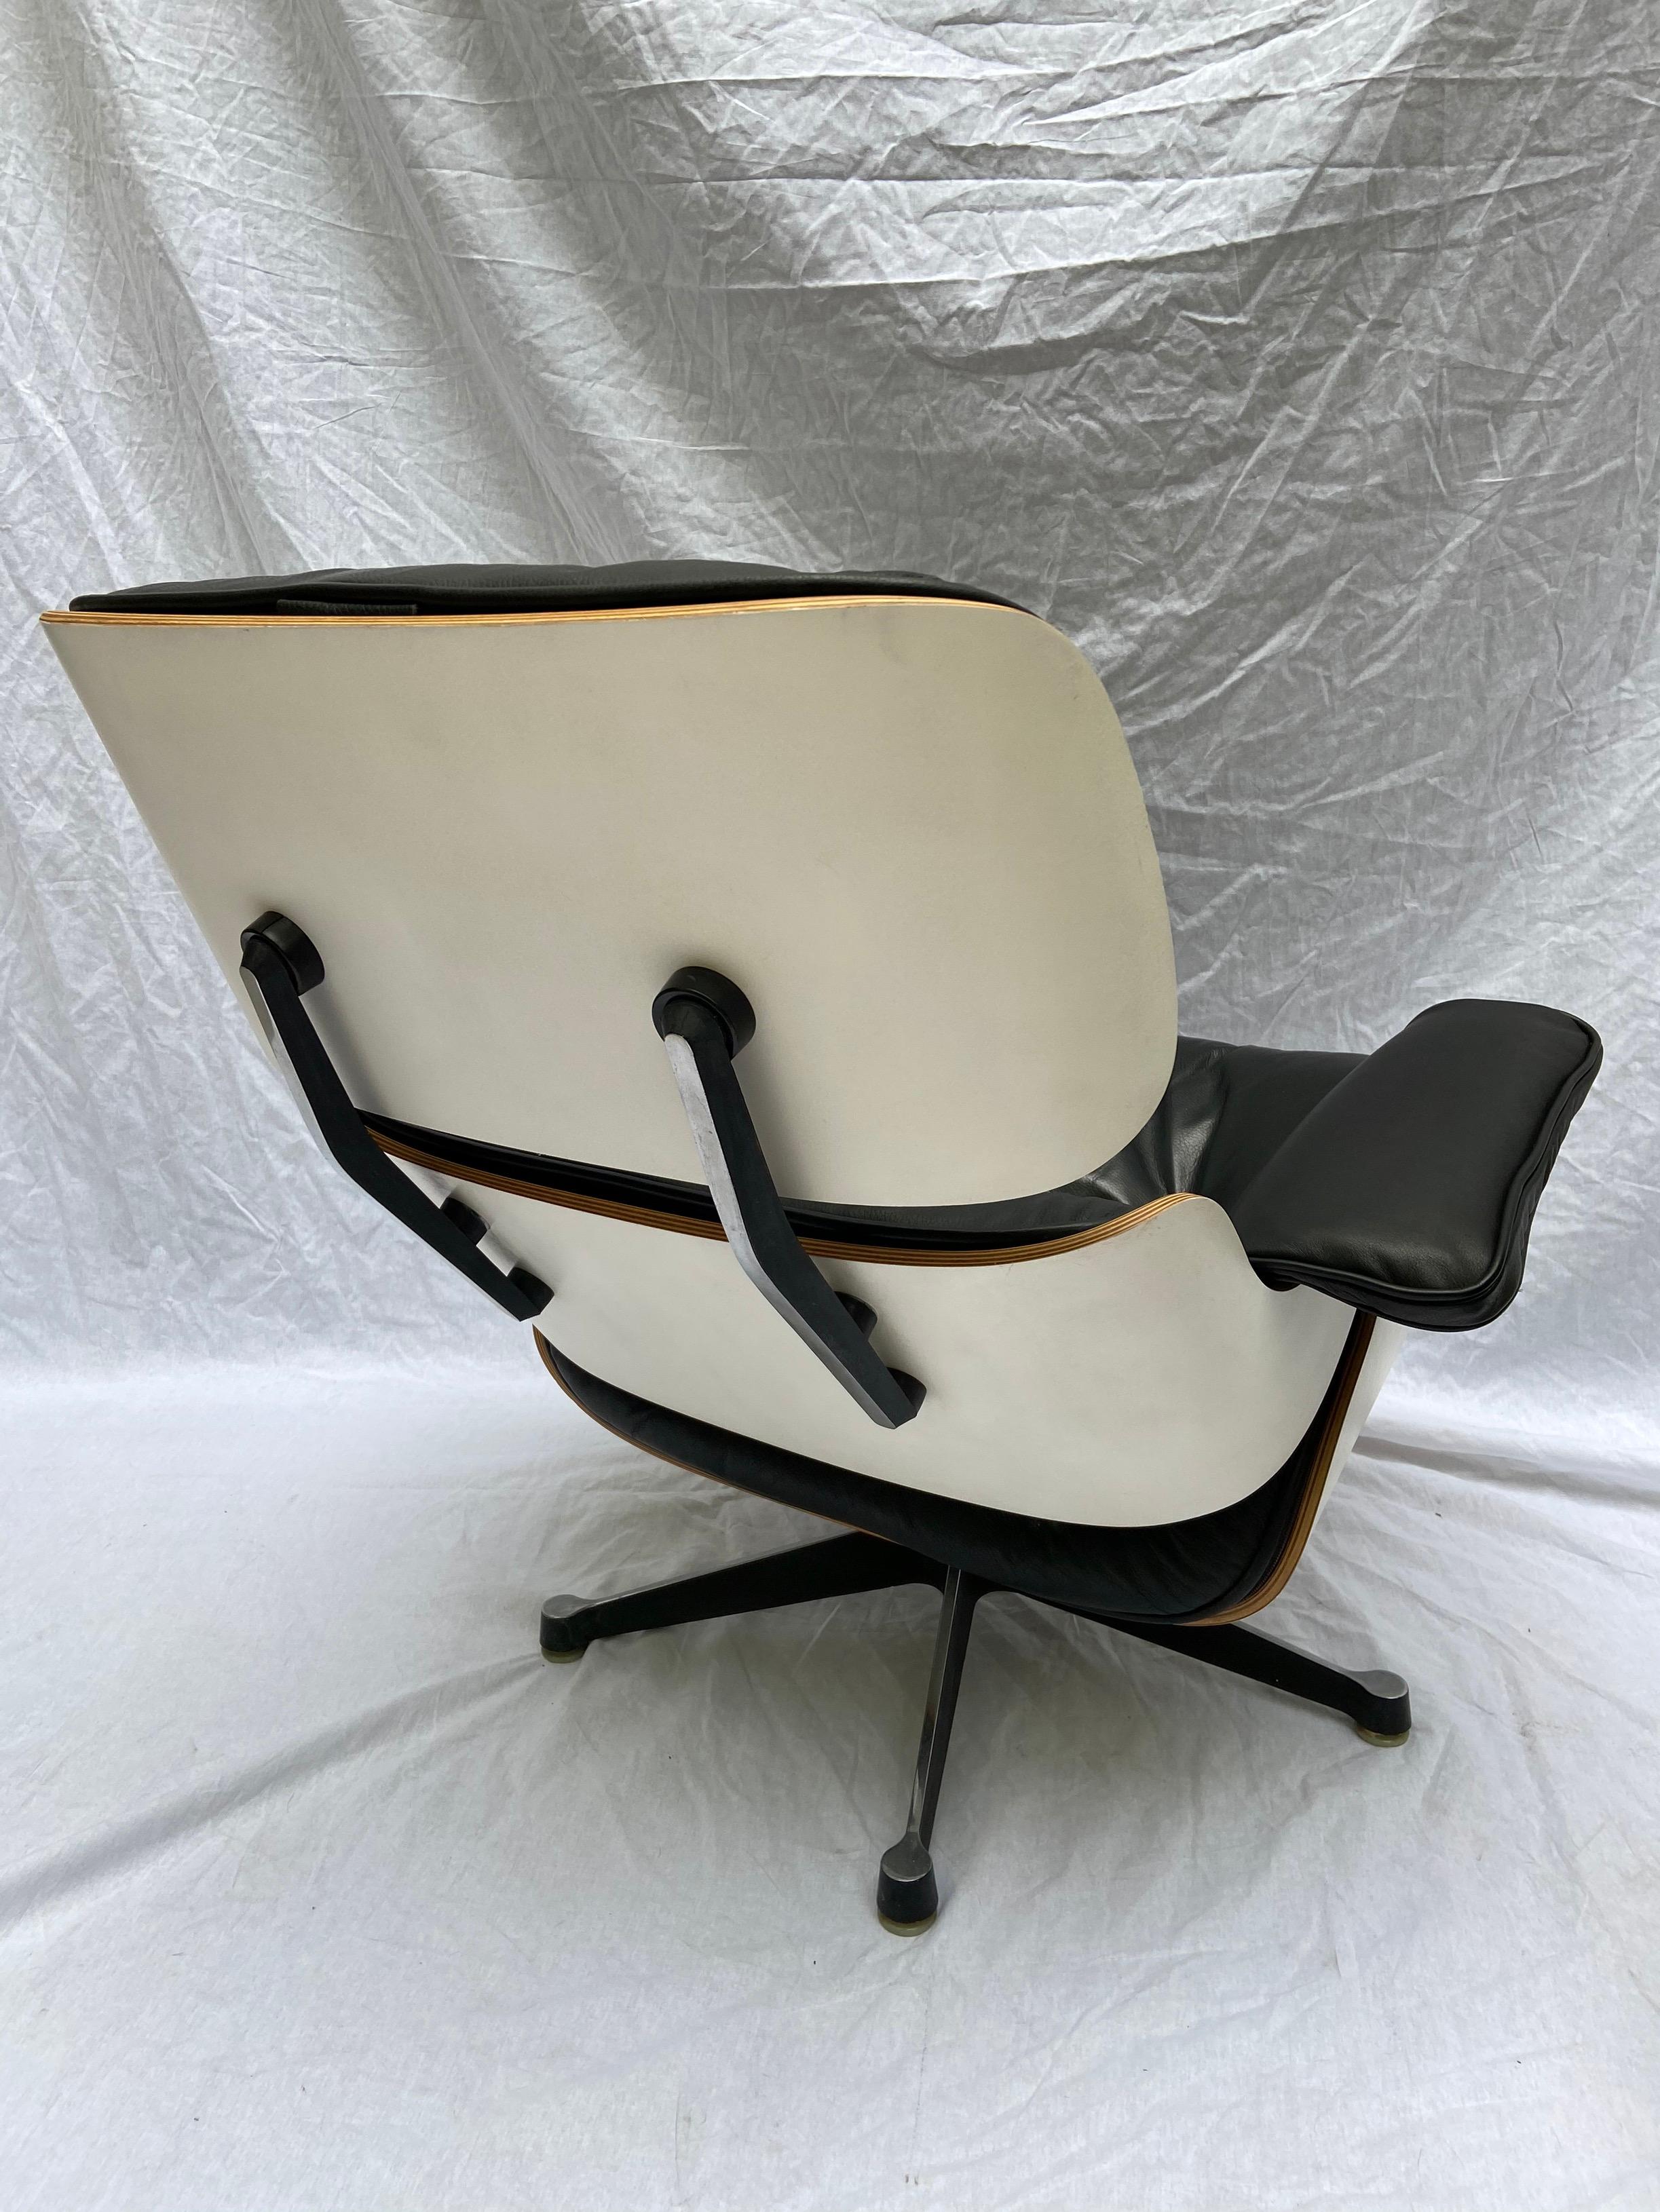 Charles Eames - Very rare version -
Lounge chair and ottoman
Black leather and white stained rosewood
Edition Hermann Miller for Mobilier International / Stamped Mobilier International
circa 1977
Superb condition
6900 Euros all together
Chair